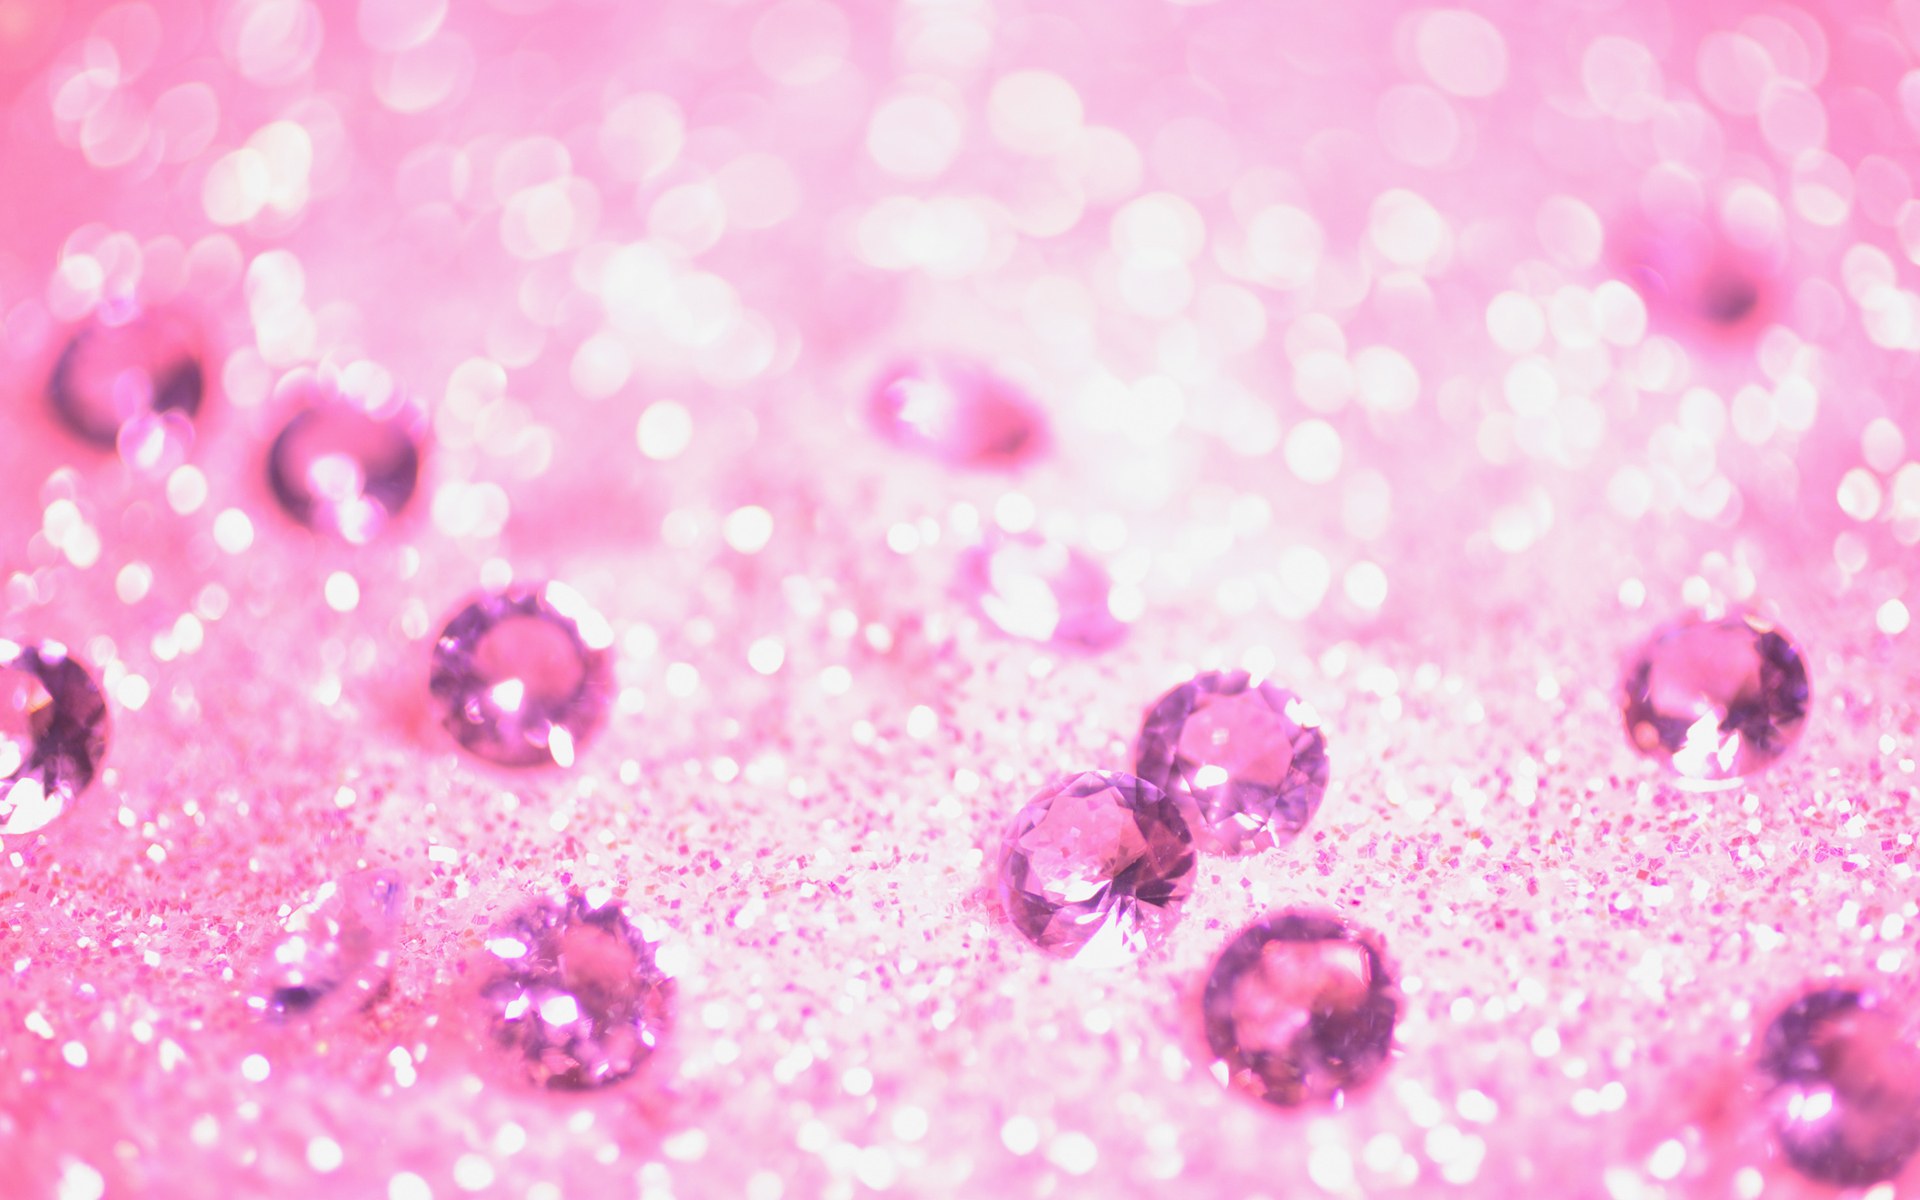 Sparkling Gemstones Wallpaper Pictures To Pin